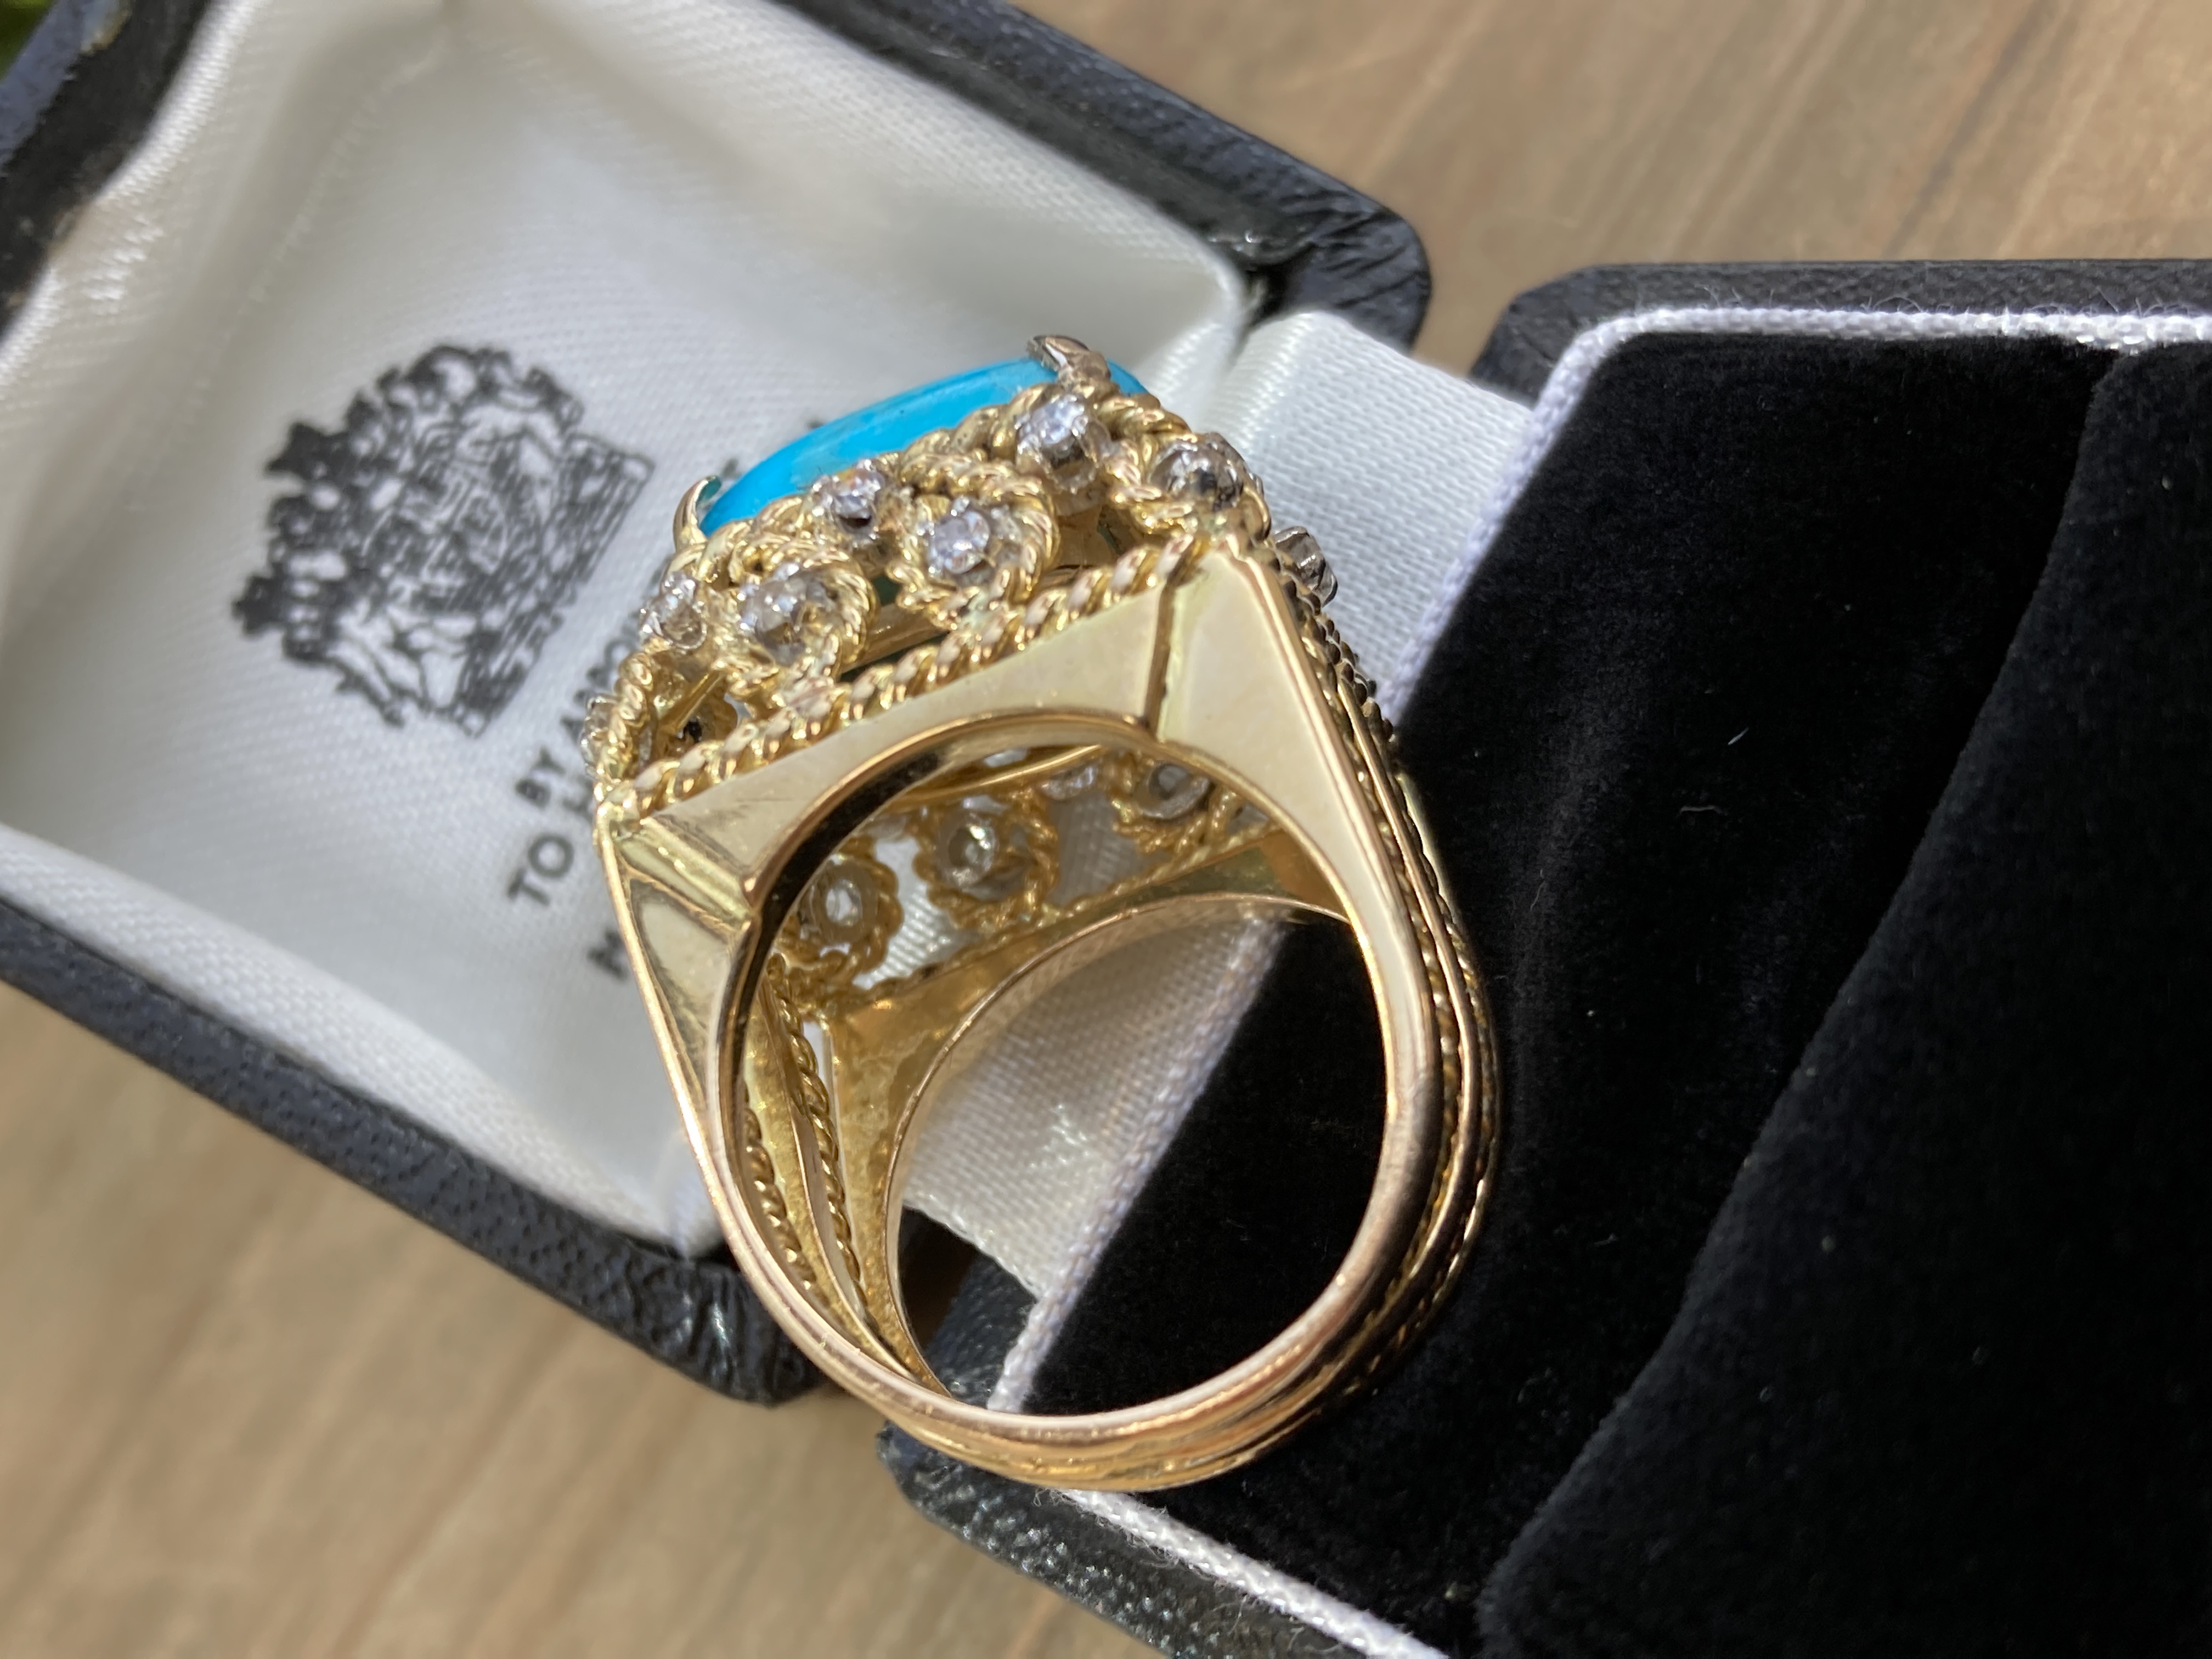 19G 18CT YELLOW GOLD TURQUOISE & DIAMOND COCKTAIL RING - Image 5 of 6